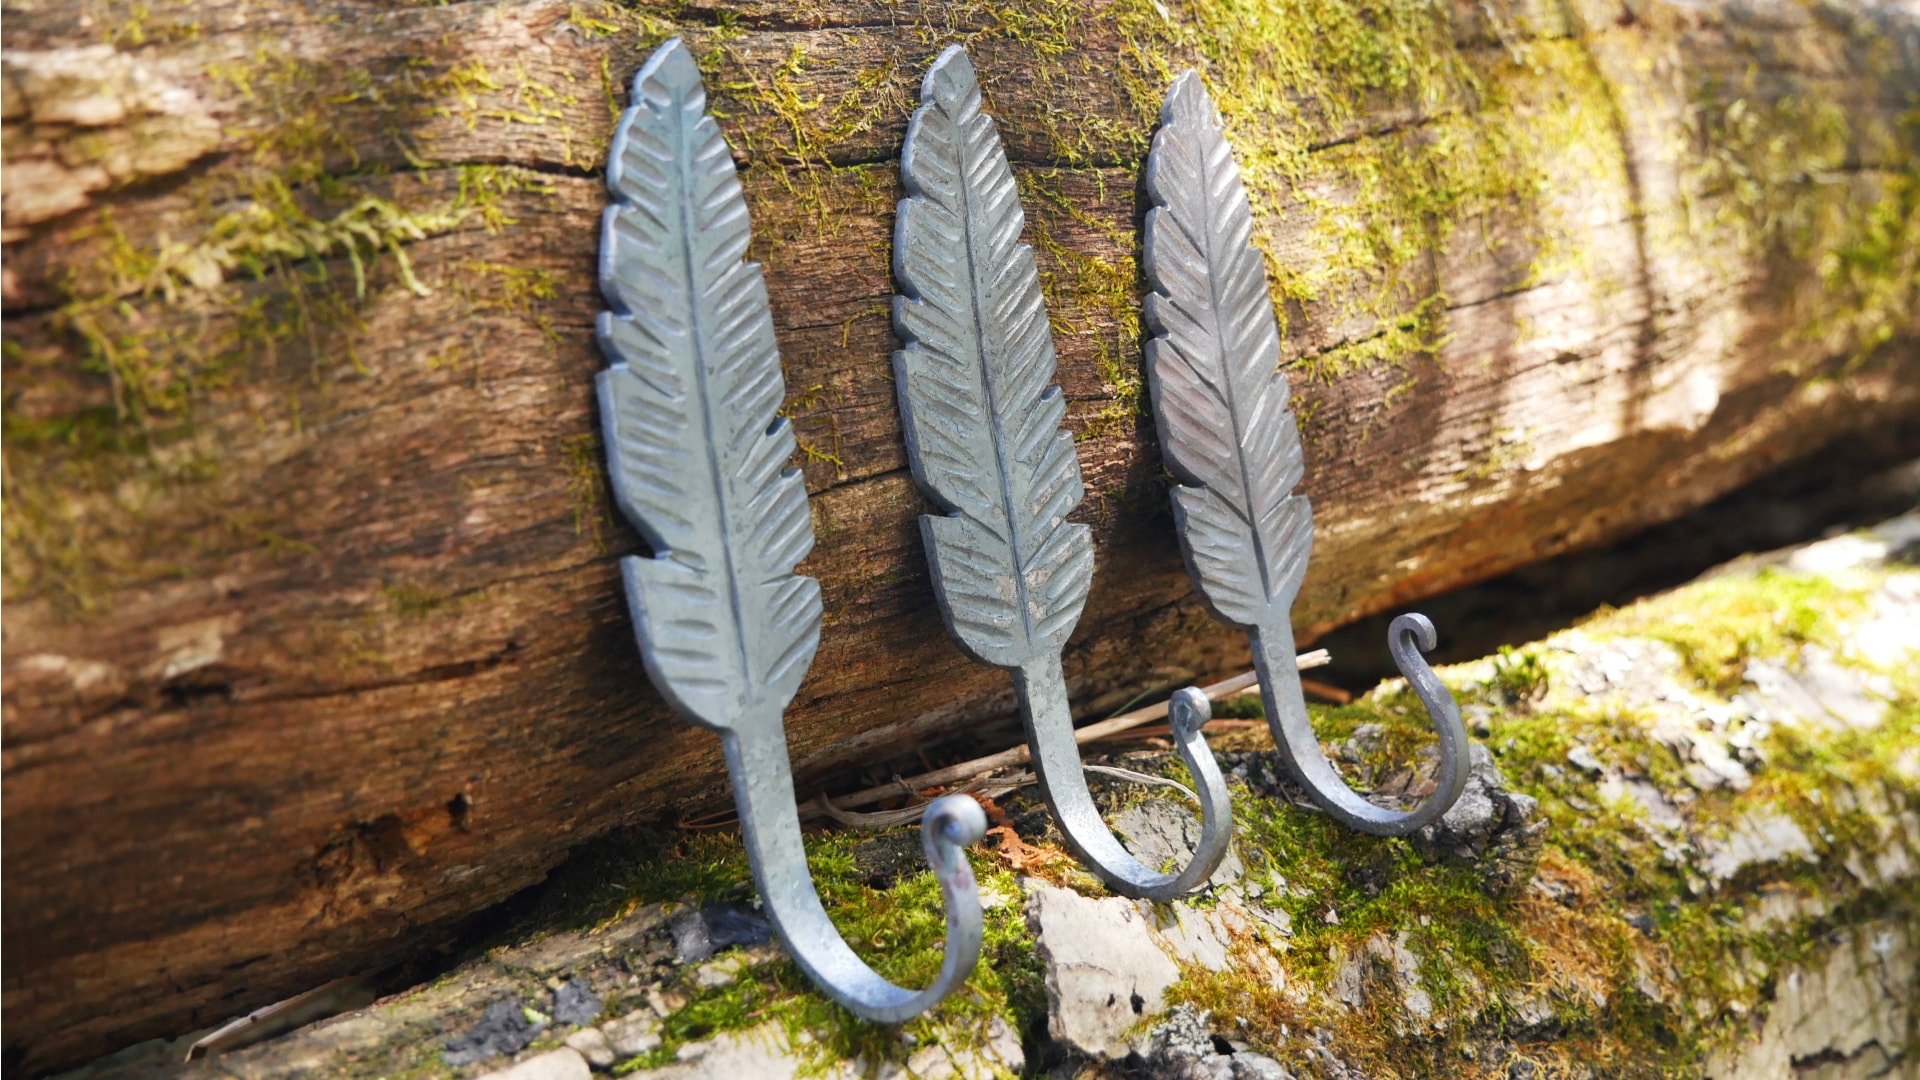 Blacksmith Blanks: Feather Hook Blank for Forging Projects